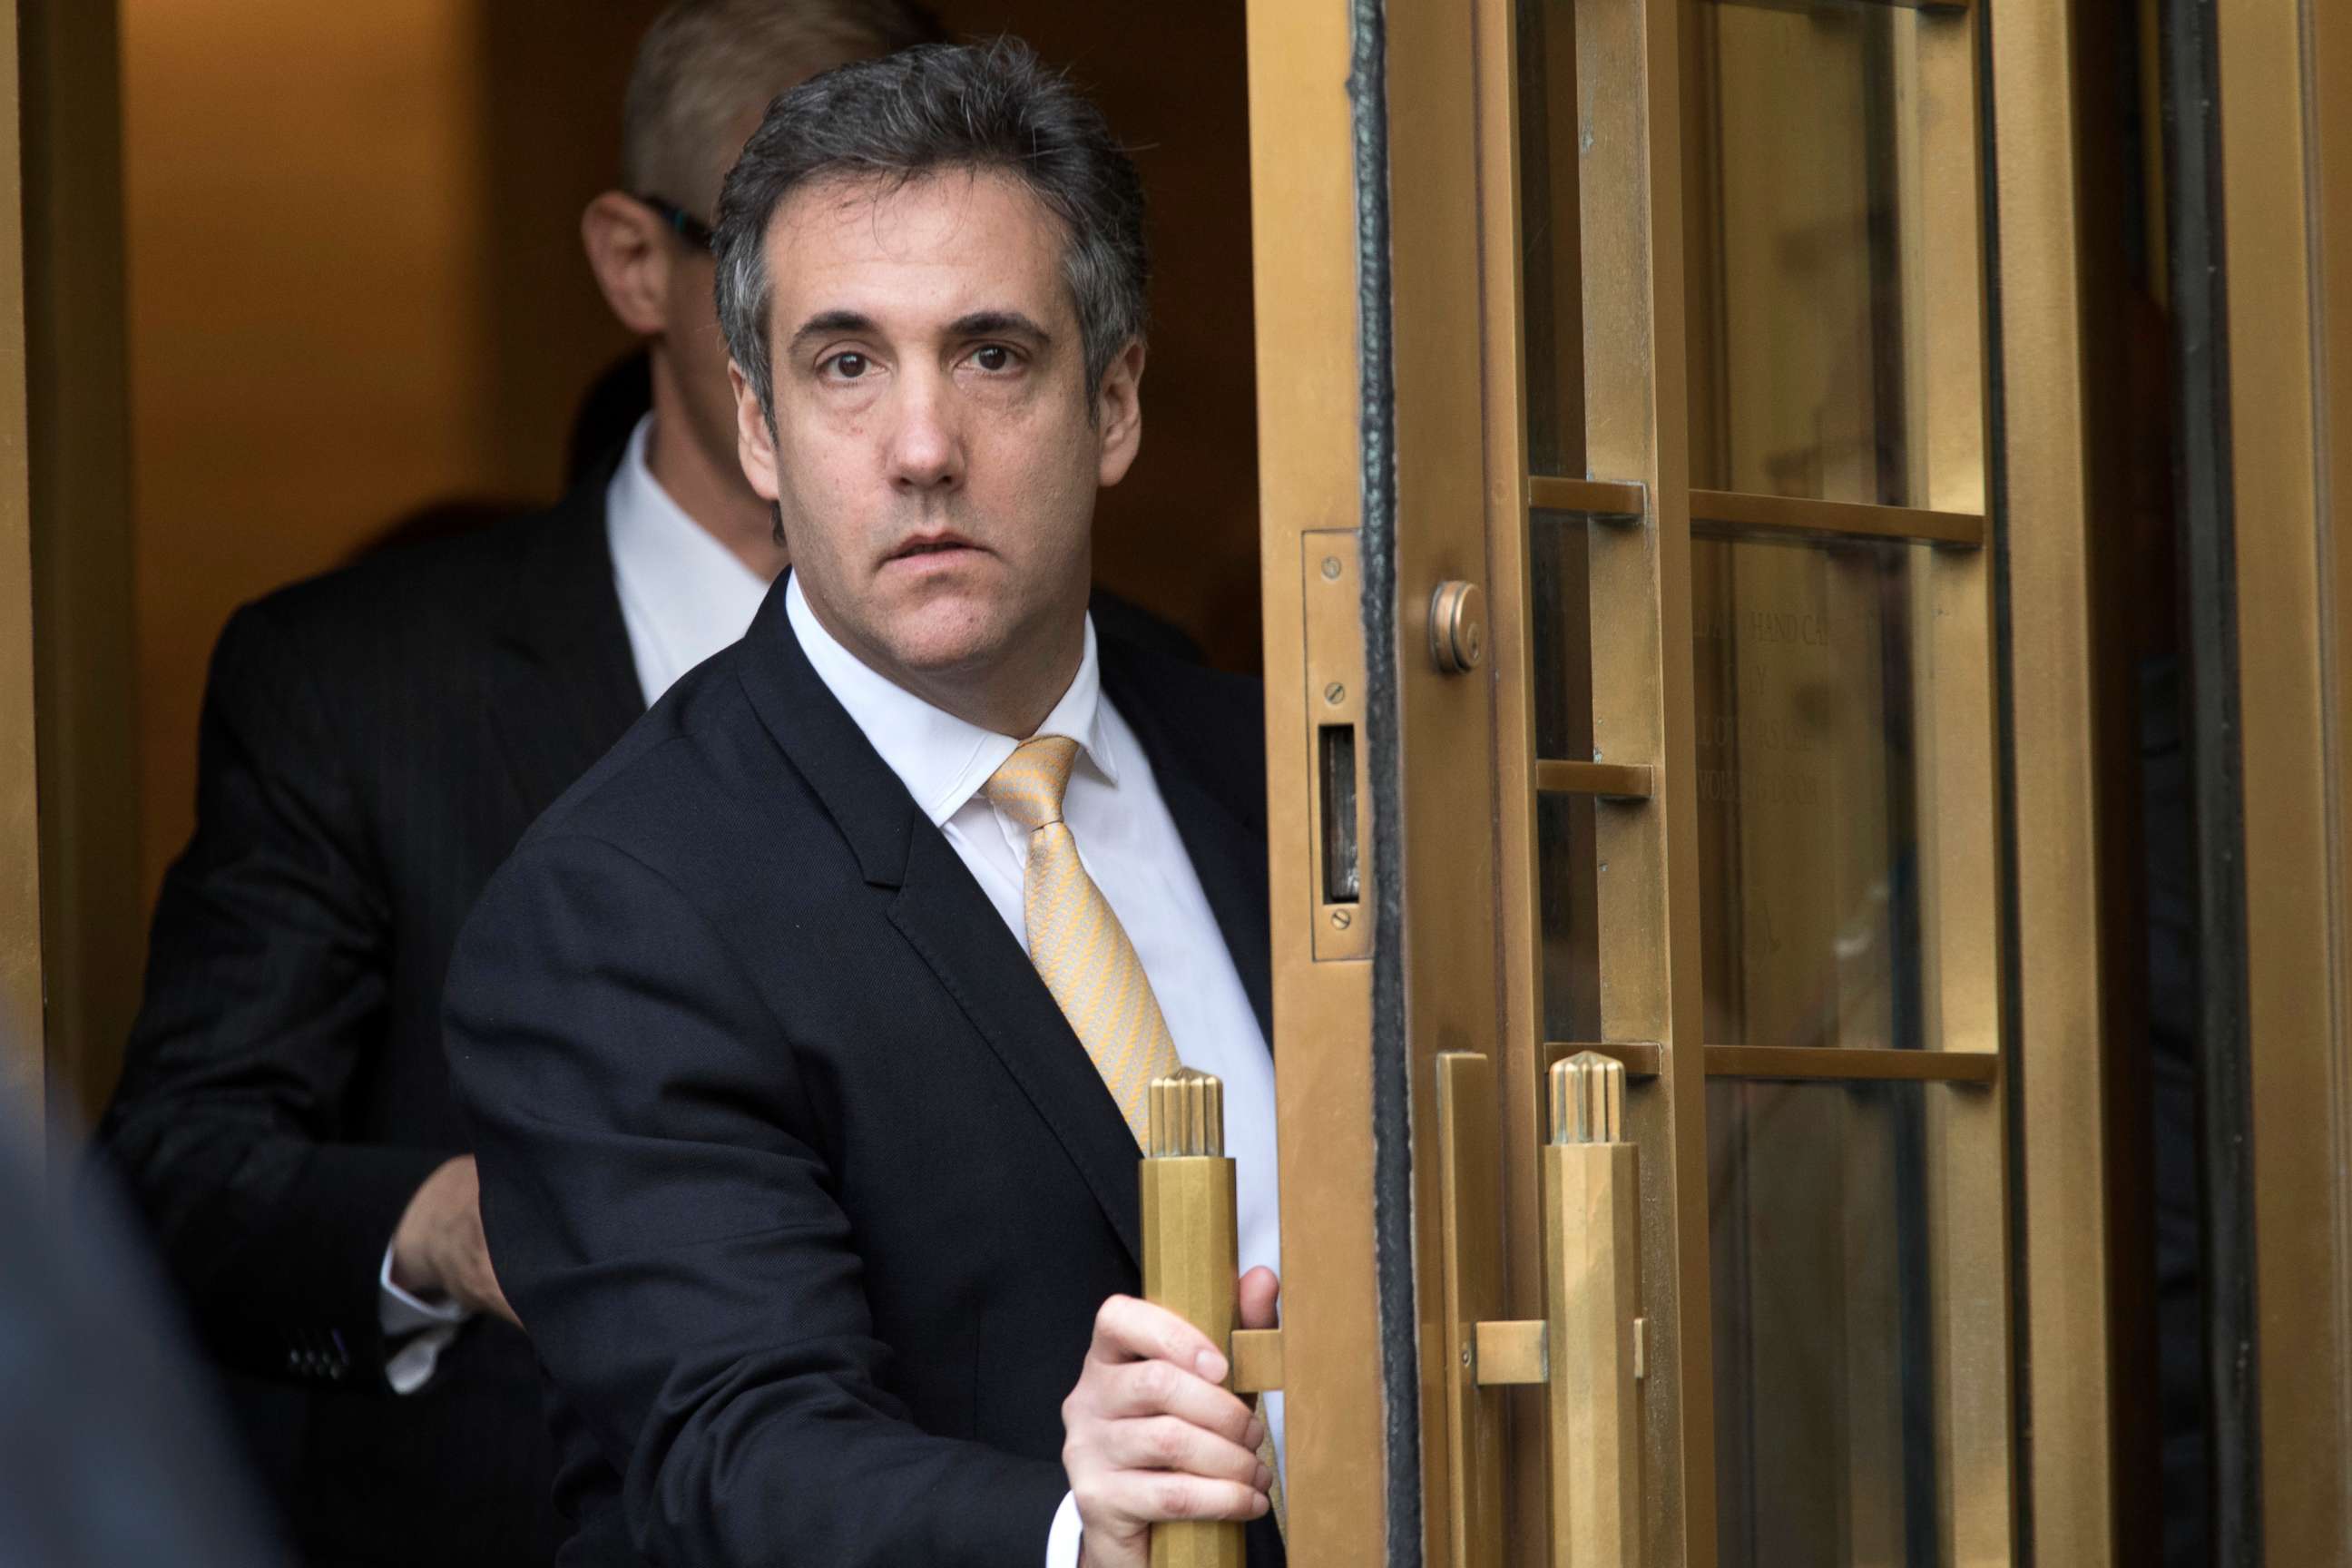 PHOTO: Michael Cohen, the former personal lawyer to President Donald Trump, leaves Federal court, Aug. 21, 2018, in New York.